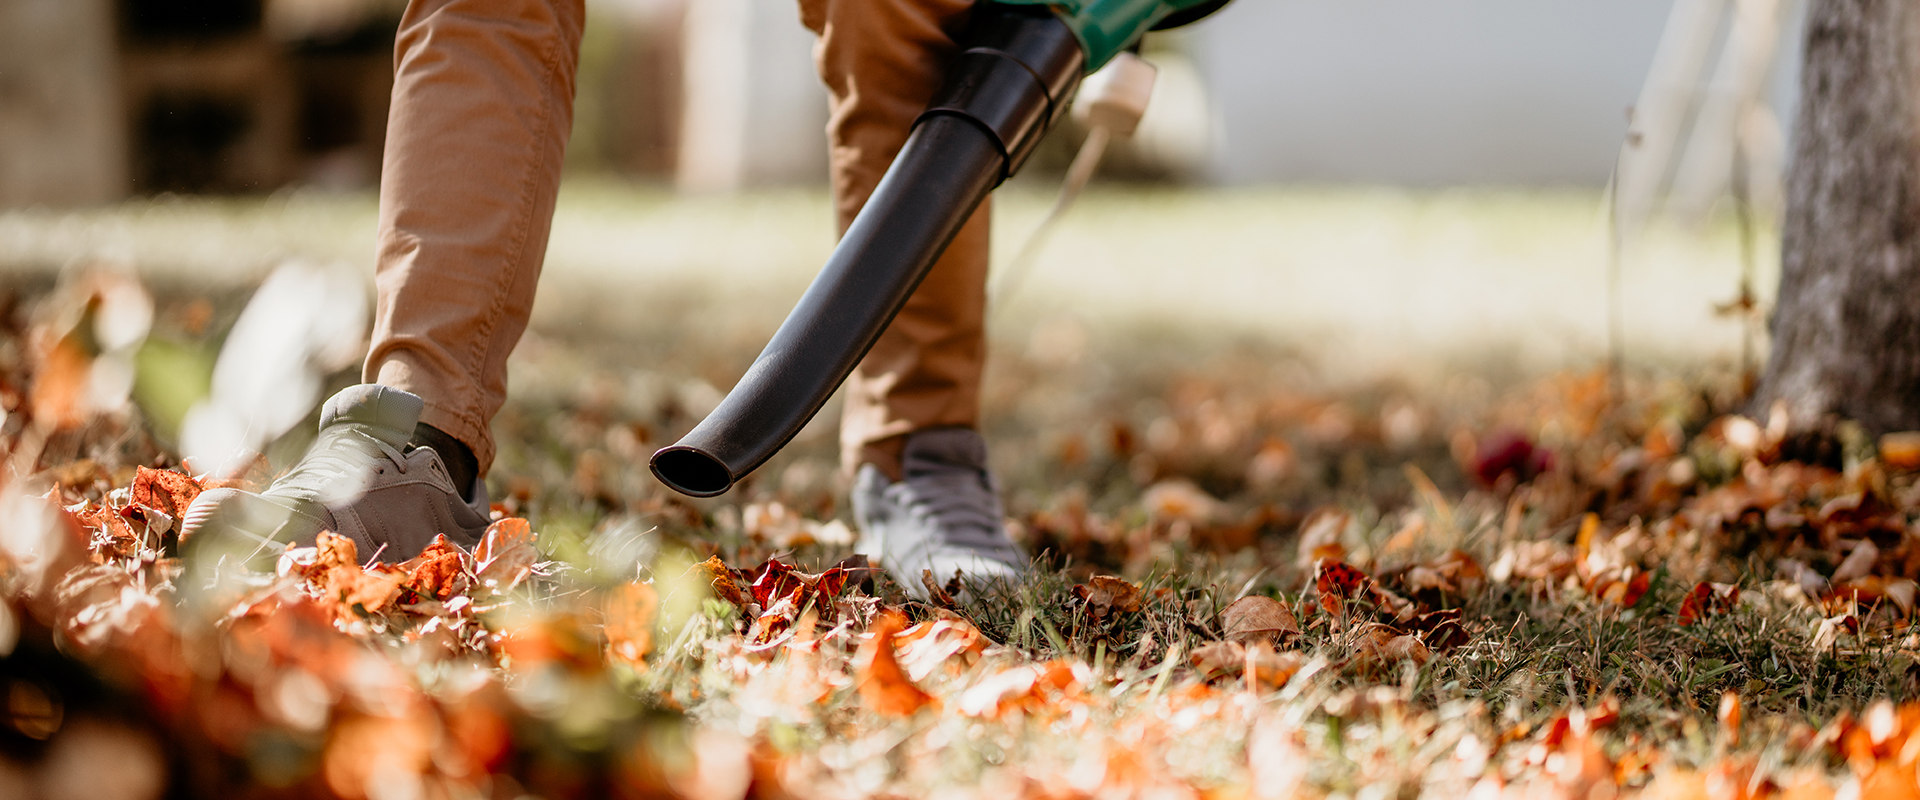 Is it Safe to Use a Leaf Blower to Clean a Dryer Vent?